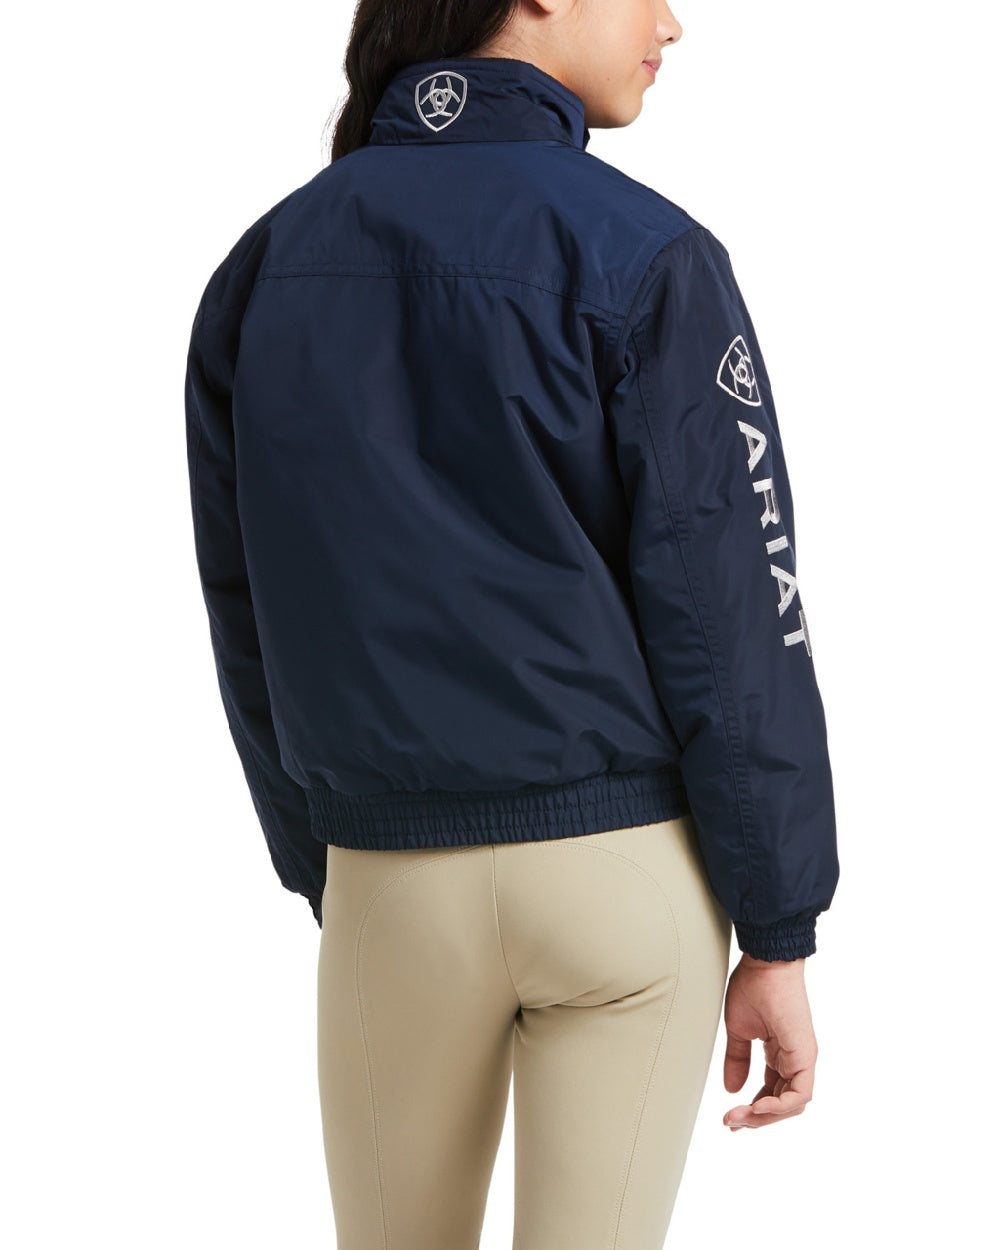 Ariat Childrens Stable Insulated Jacket in Navy 